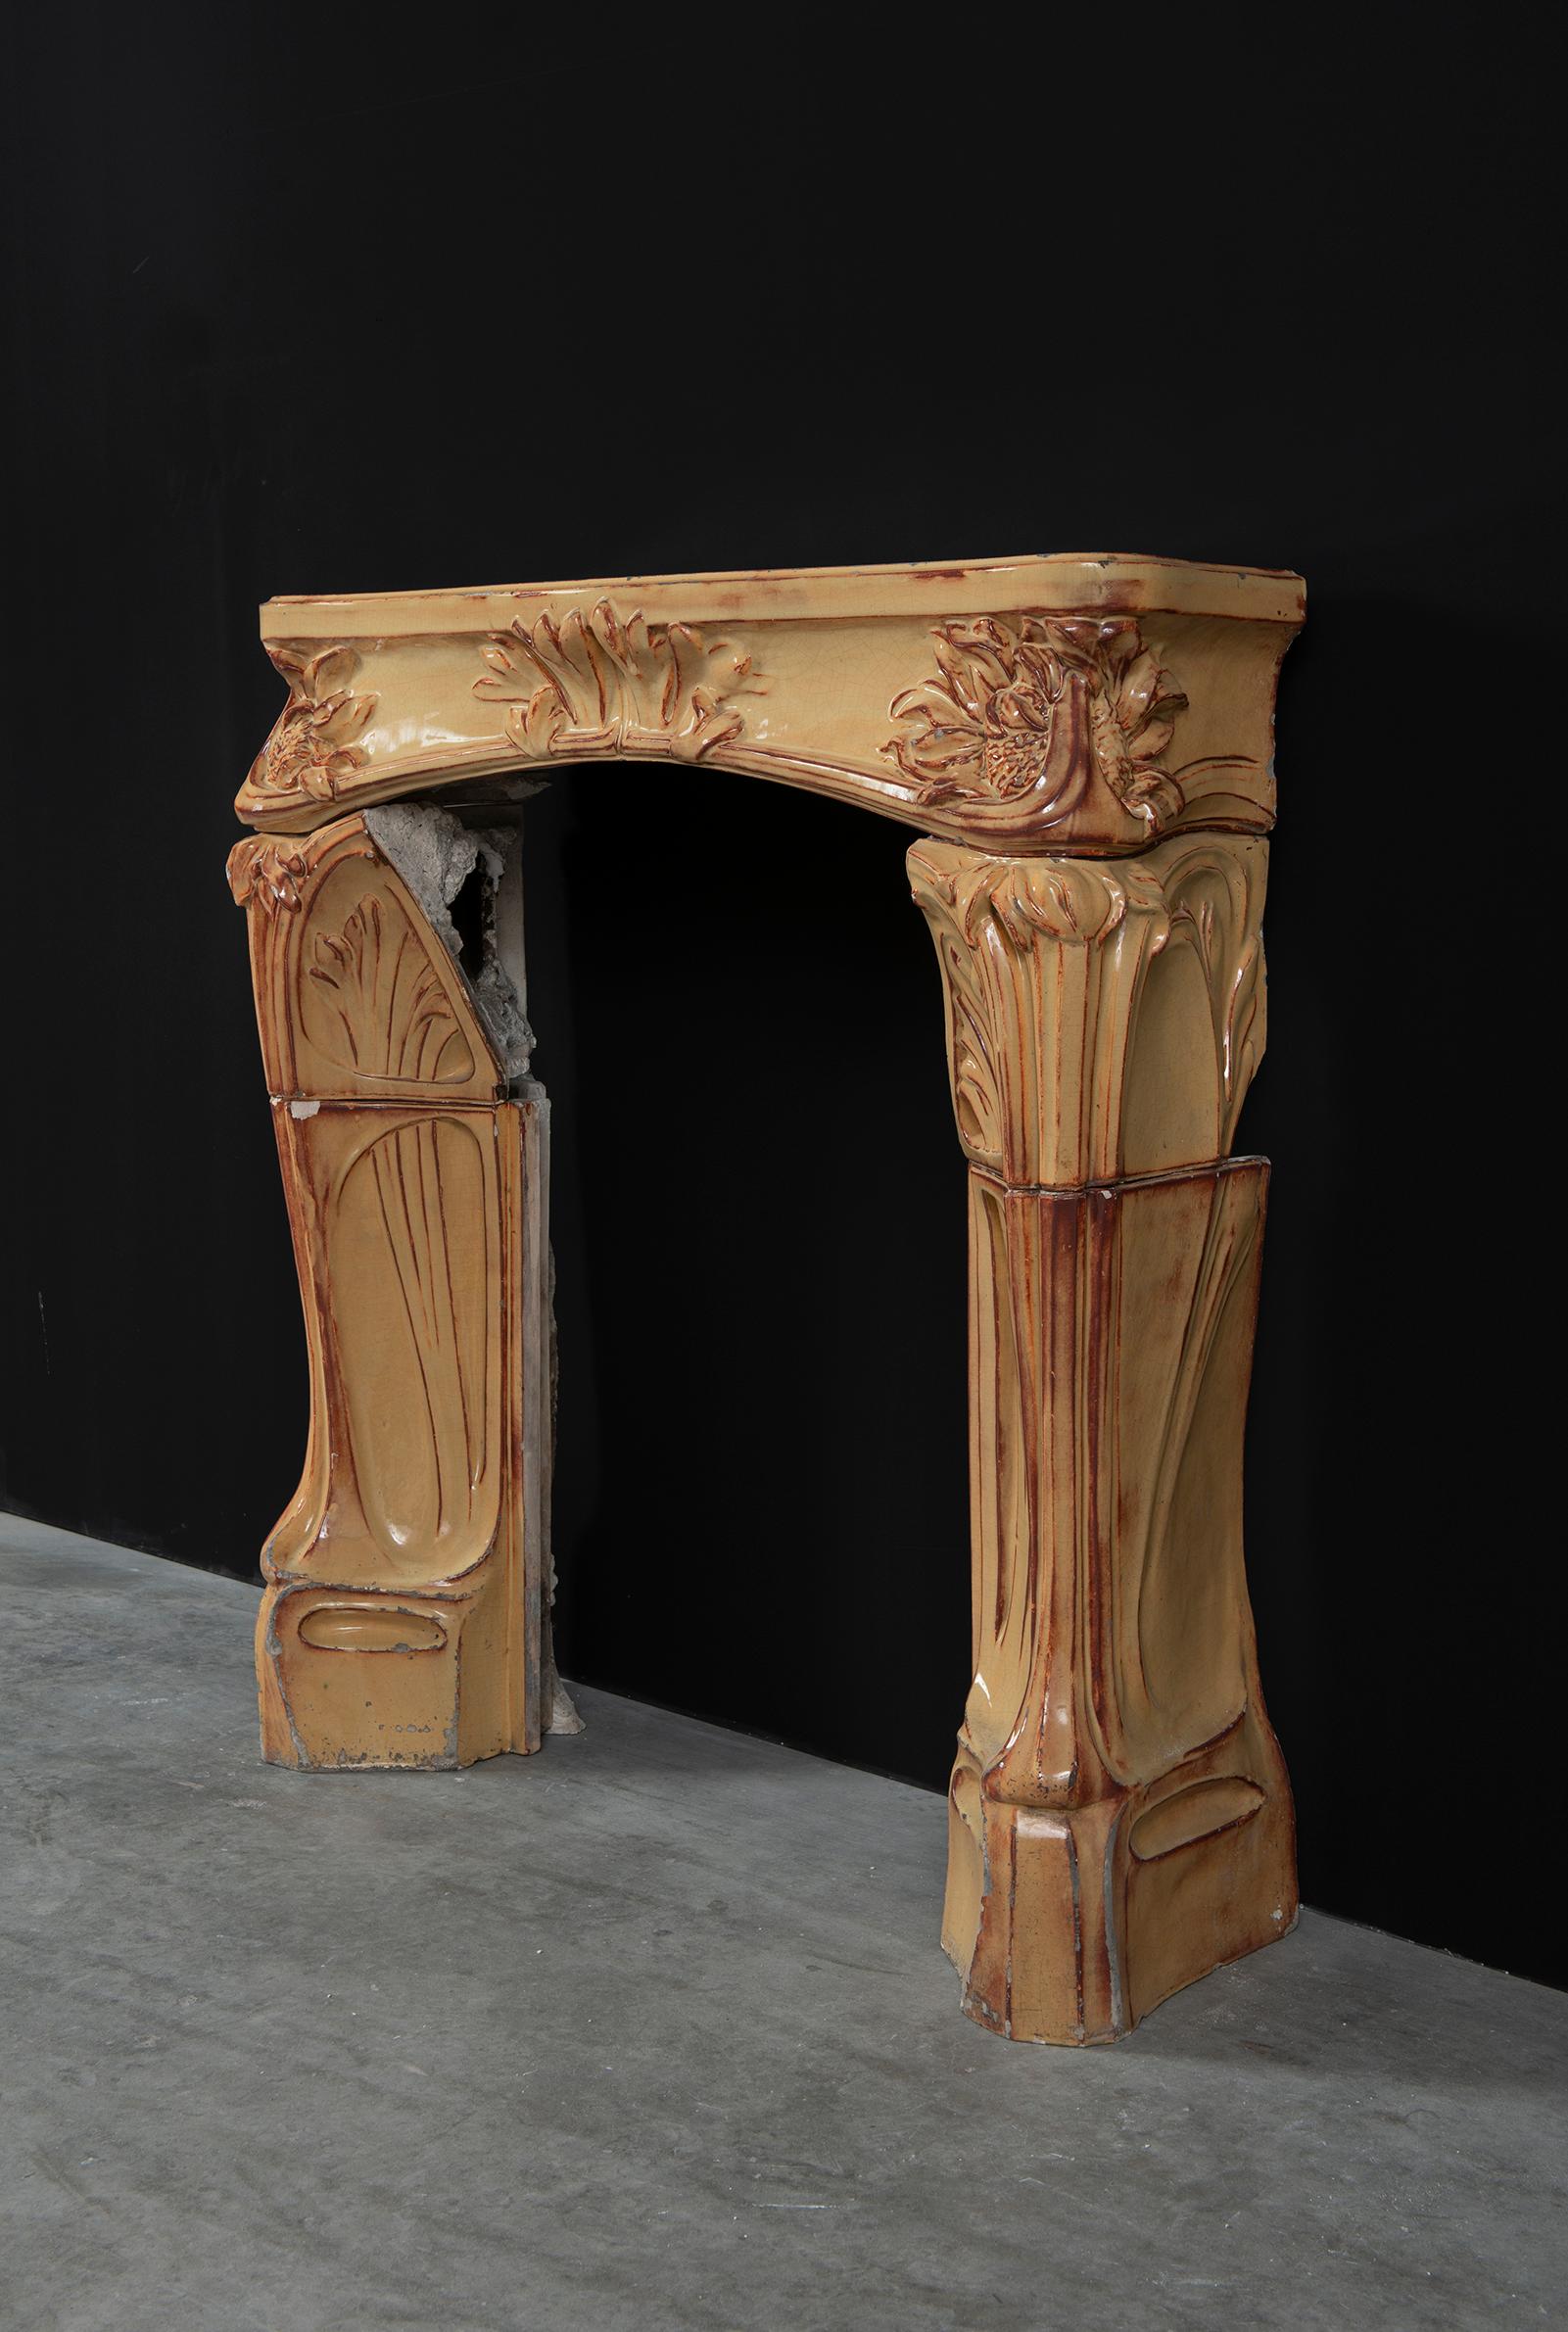 Antique Fireplace Mantel en Faience by Louis Majorelle In Fair Condition For Sale In Haarlem, Noord-Holland